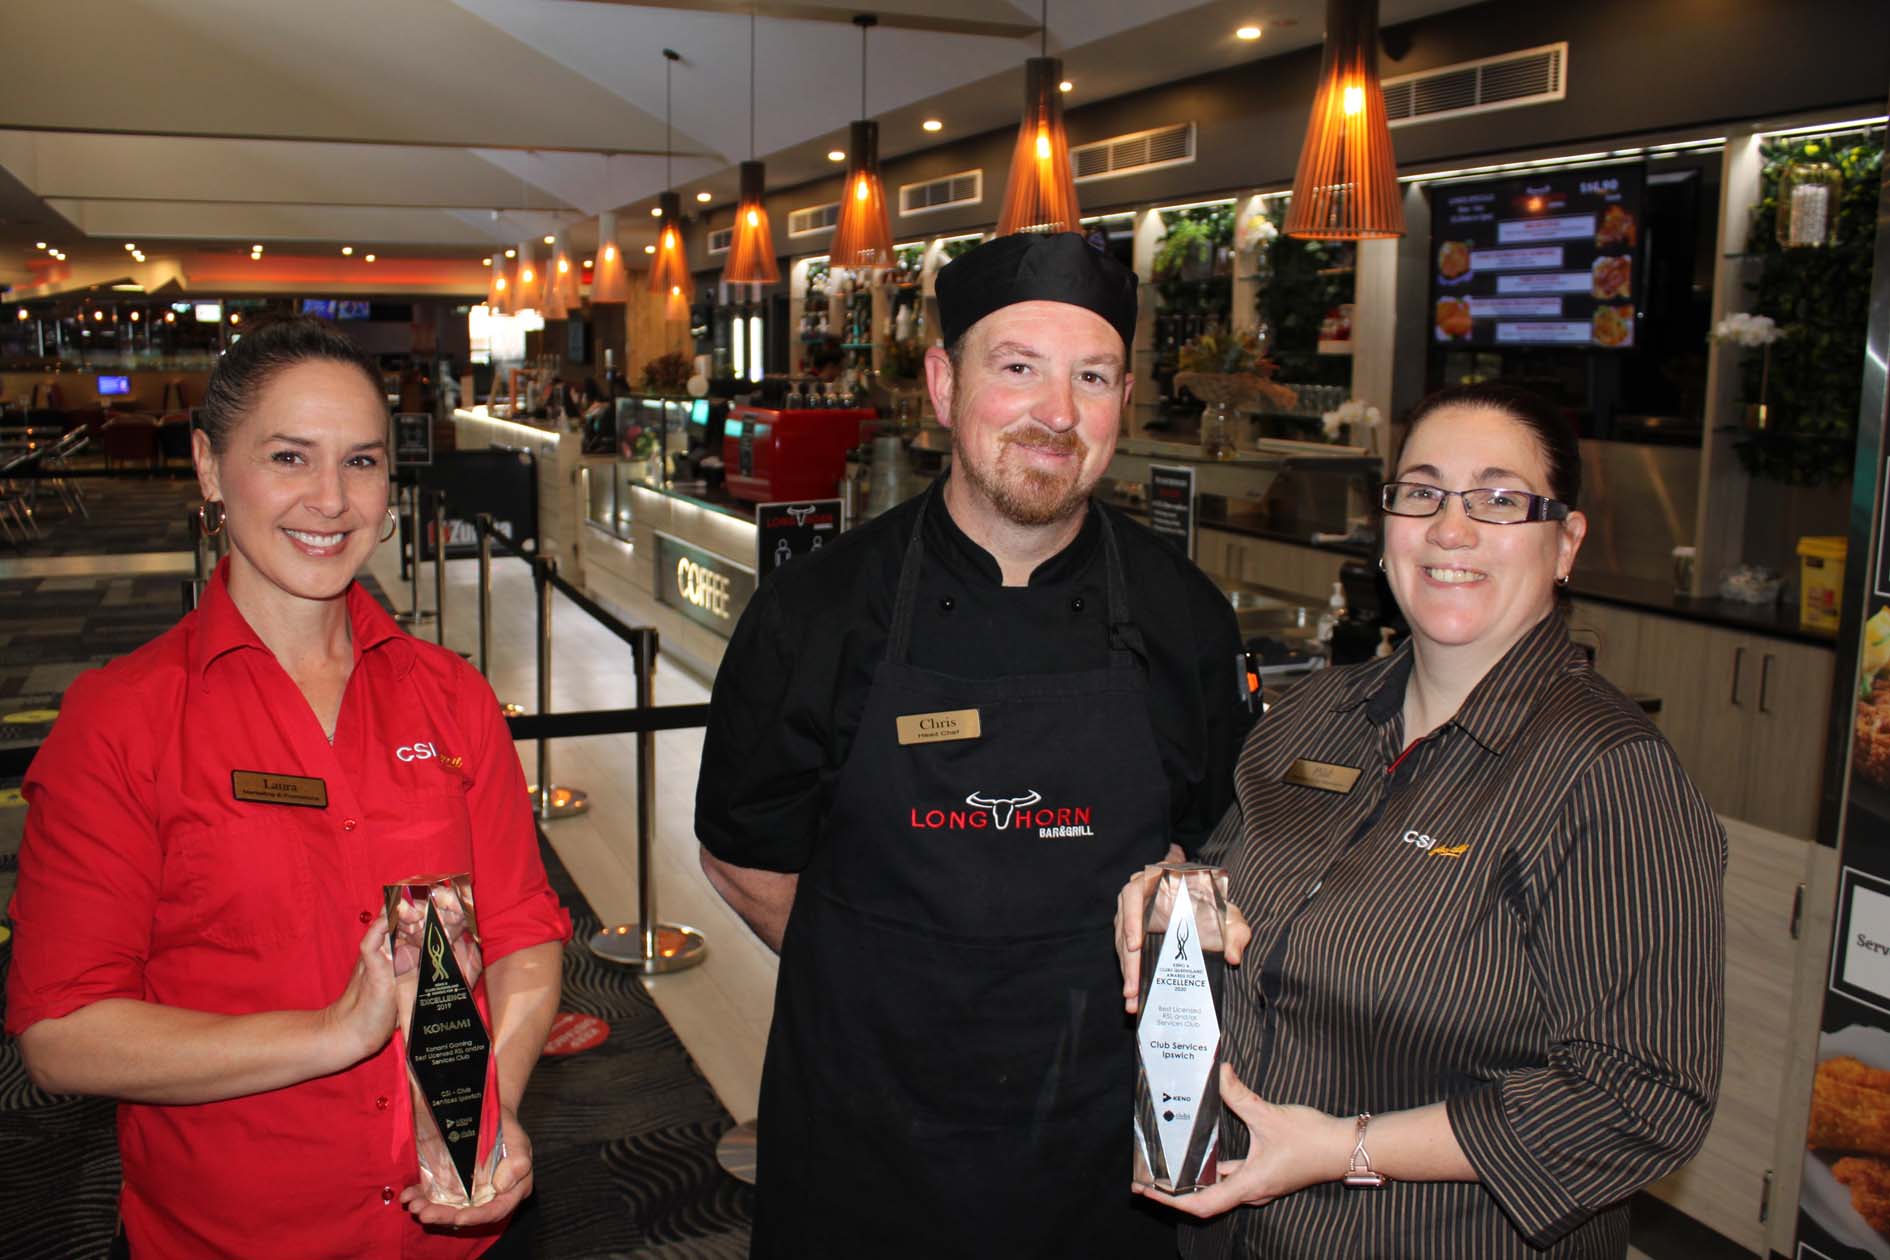 Laura Rojek – Marketing Manager, Chris Celere – Head Chef for over 5 years, and Pilar Tester – Manager